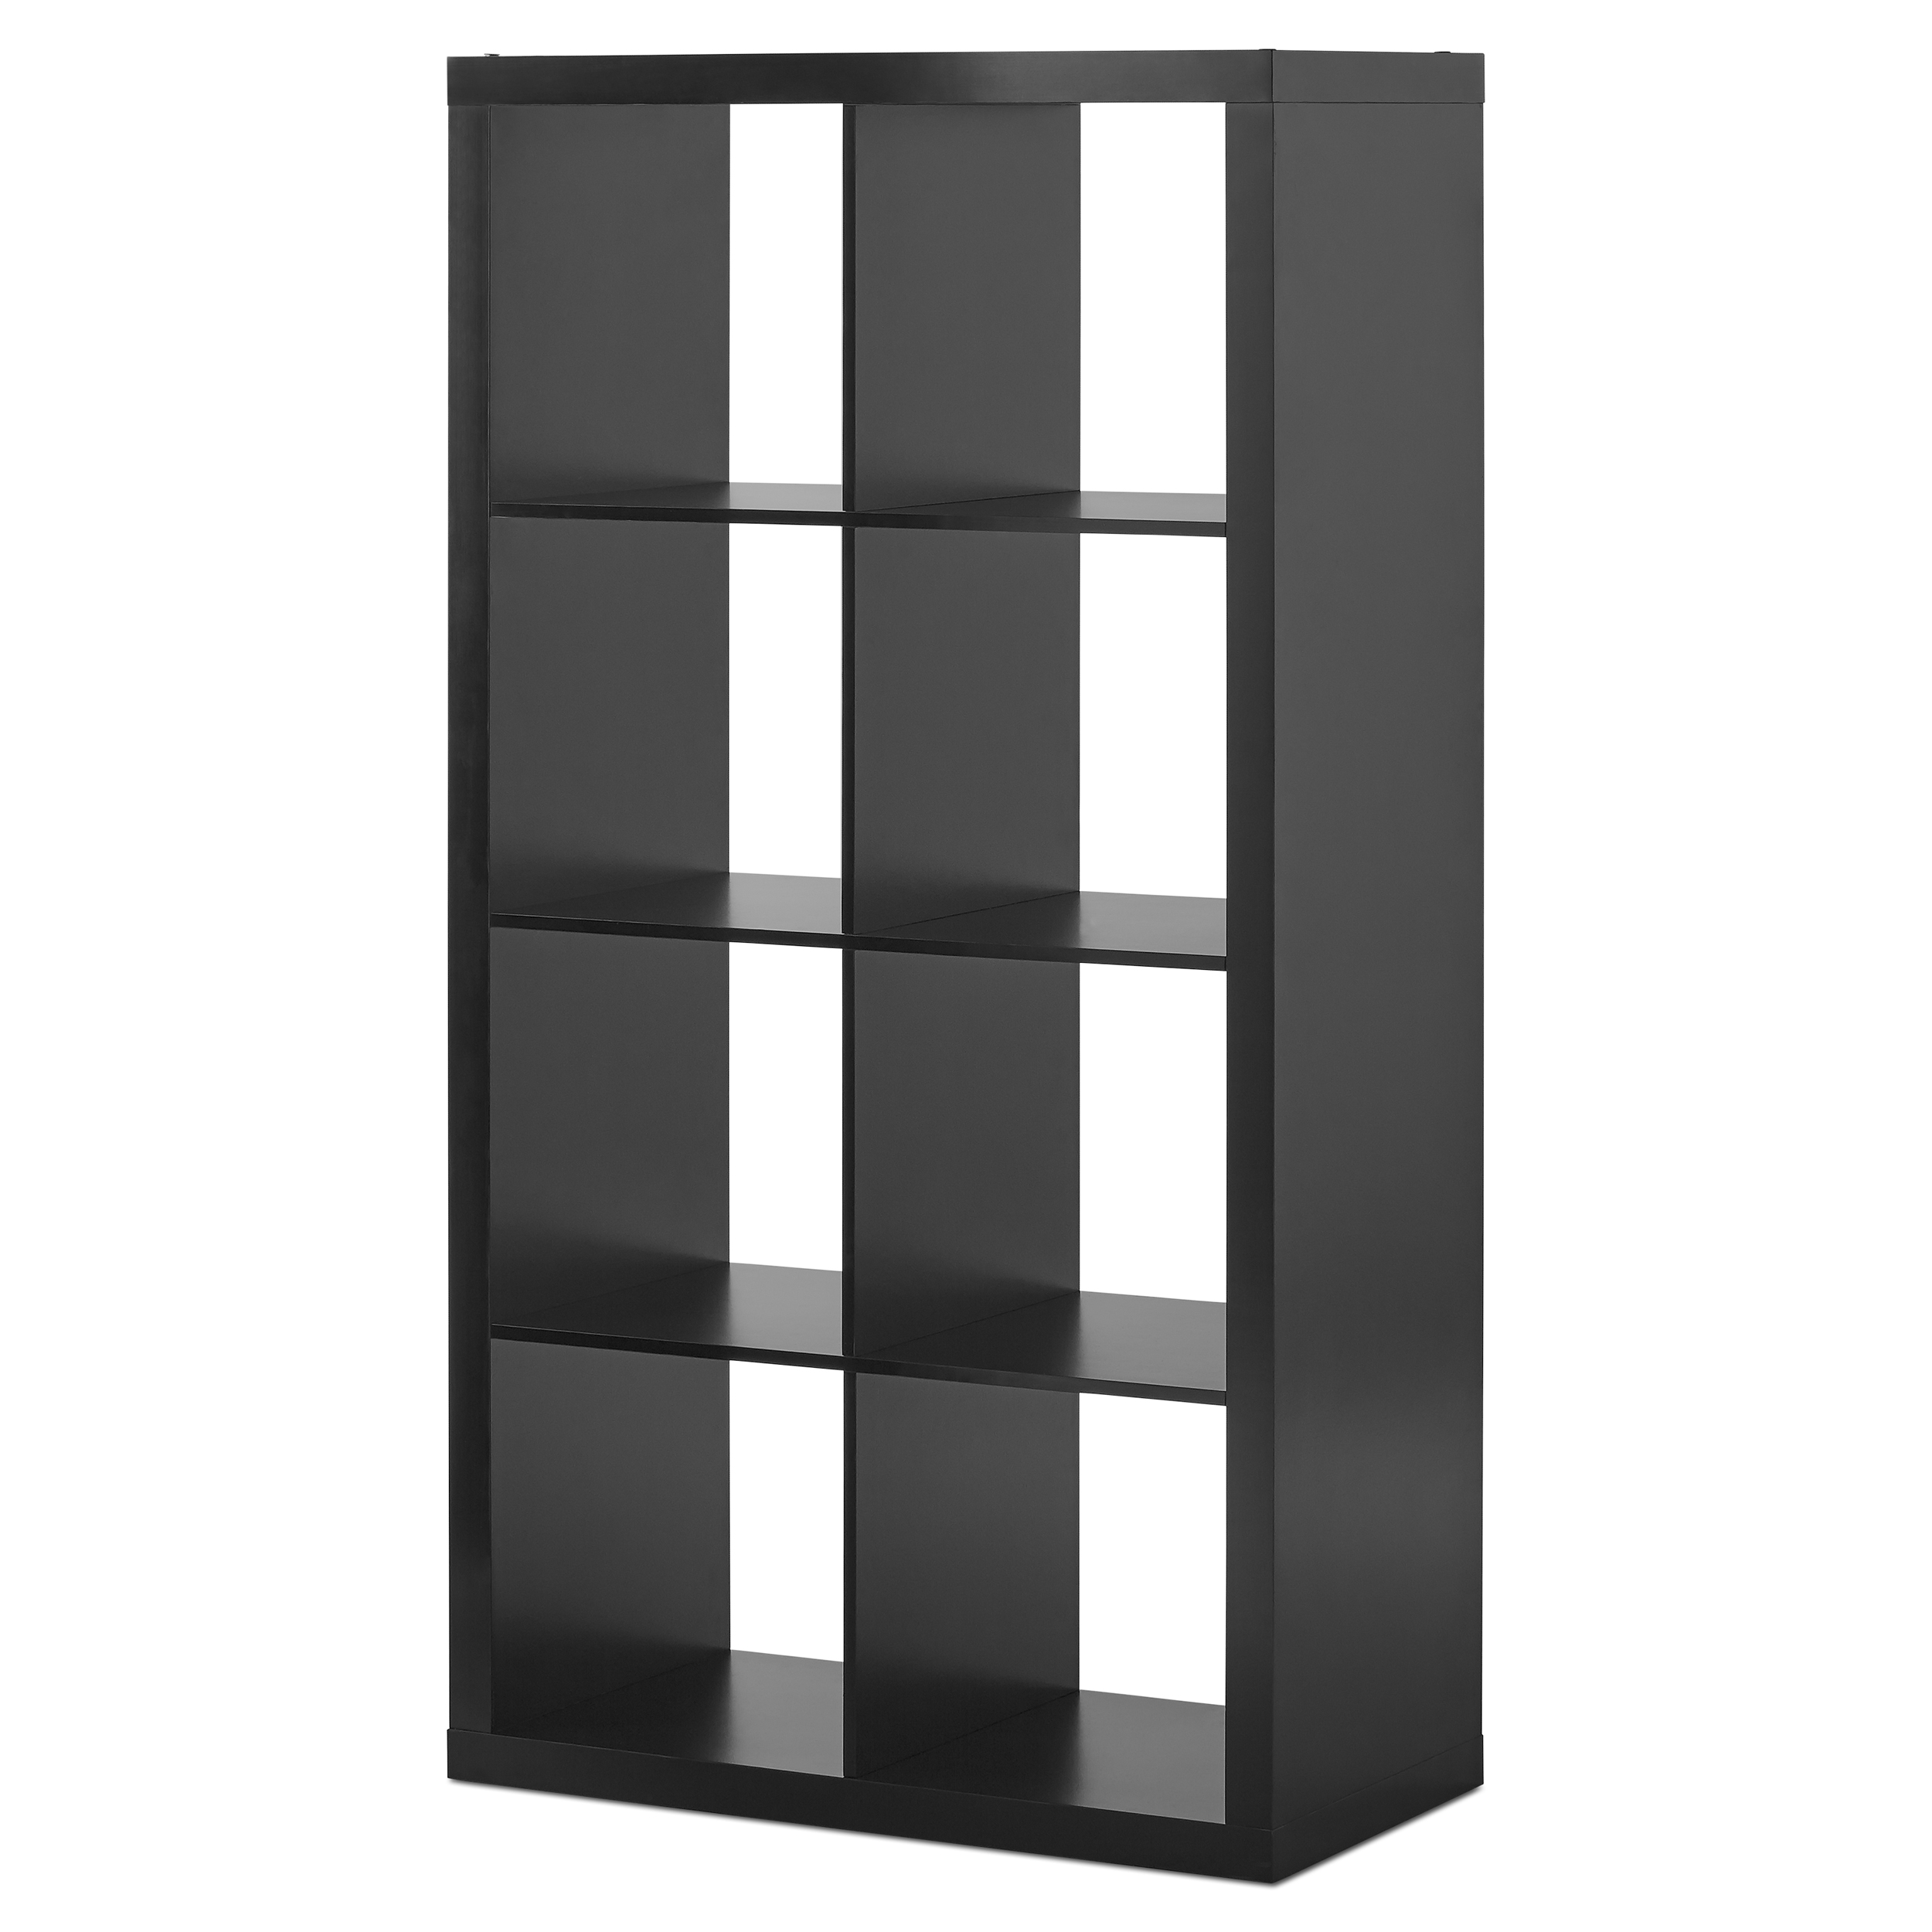 Better Homes & Gardens 8-Cube Storage Organizer, Solid Black - image 1 of 7